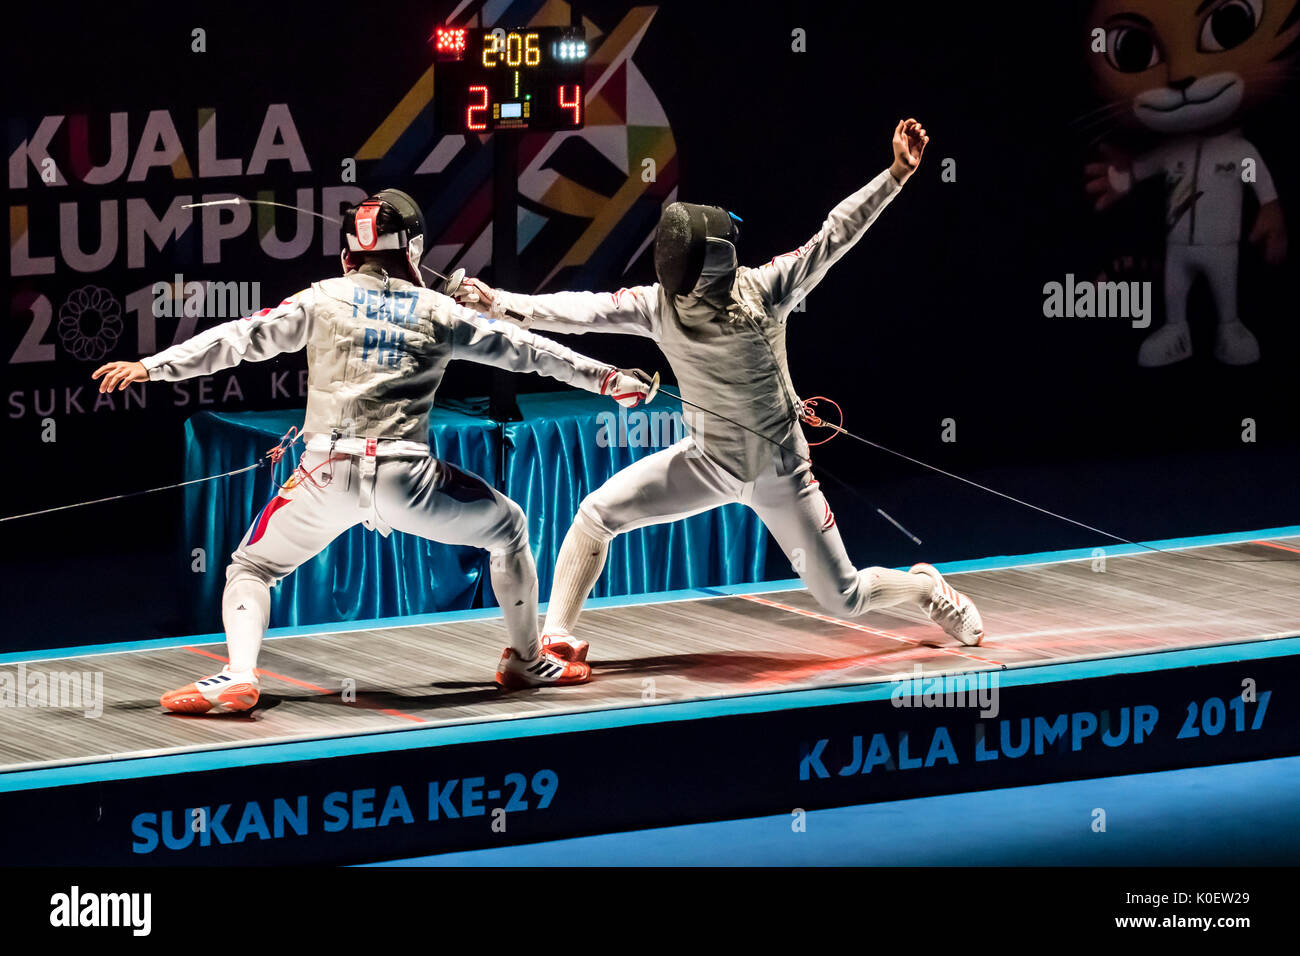 Kuala Lumpur, Malaysia. 22nd Aug, 2017. Fencing semi finals Men's Foil Individual Jet Ng from Singapore (SGP) twisted his right ankle during competition. After medic help to bandage his ankle, Ng compete on. Perez of Philippines (PHI) won. Credit: Danny Chan/Alamy Live News Stock Photo